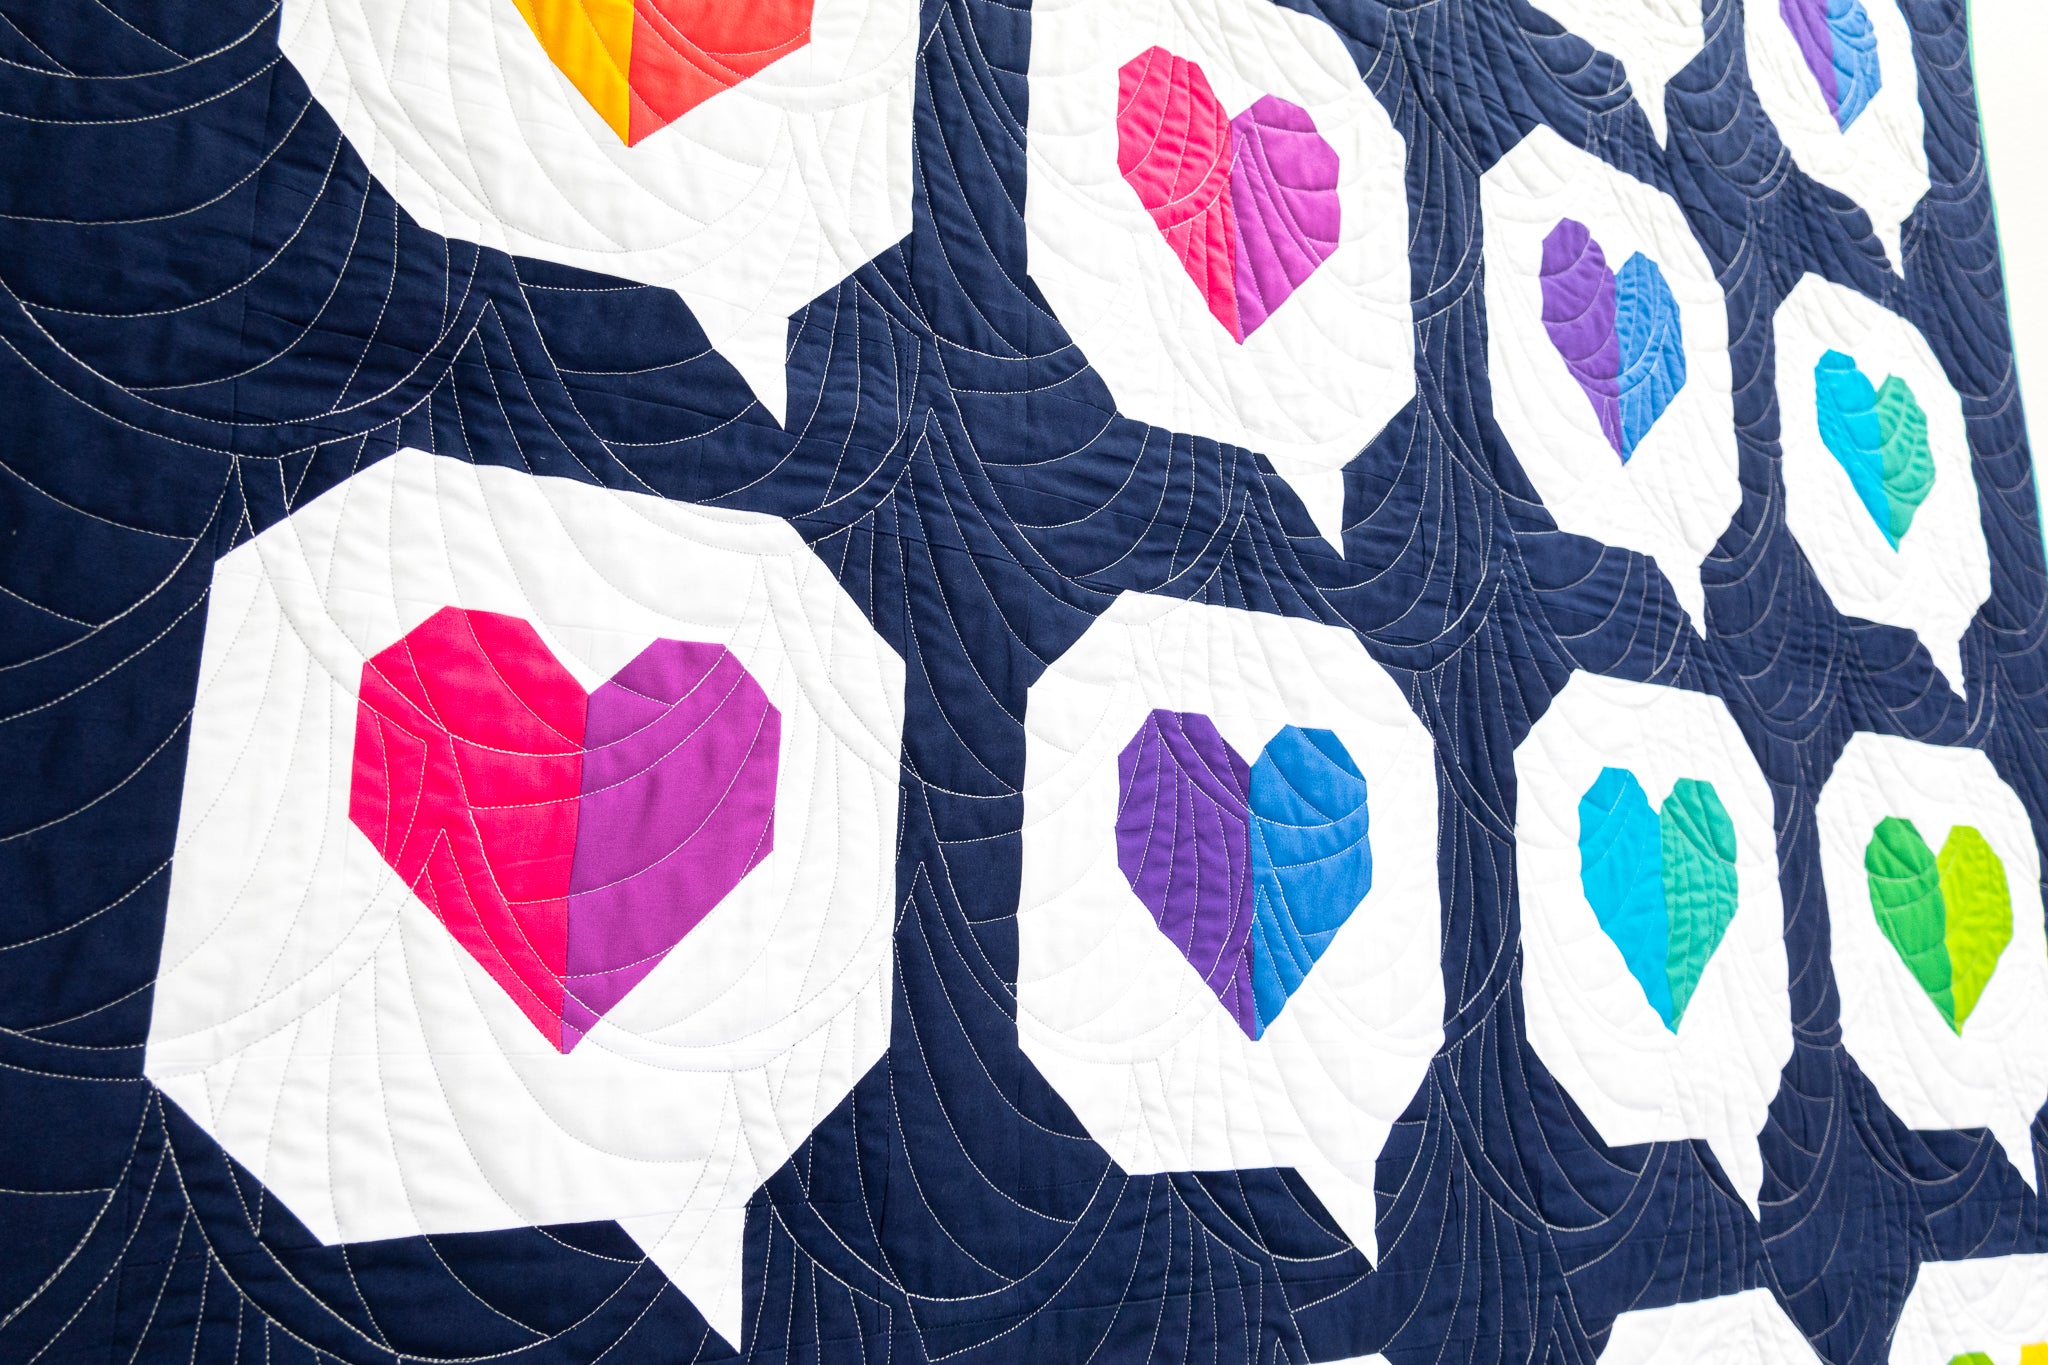 I Heart You quilt in rainbow solids - Sewfinity